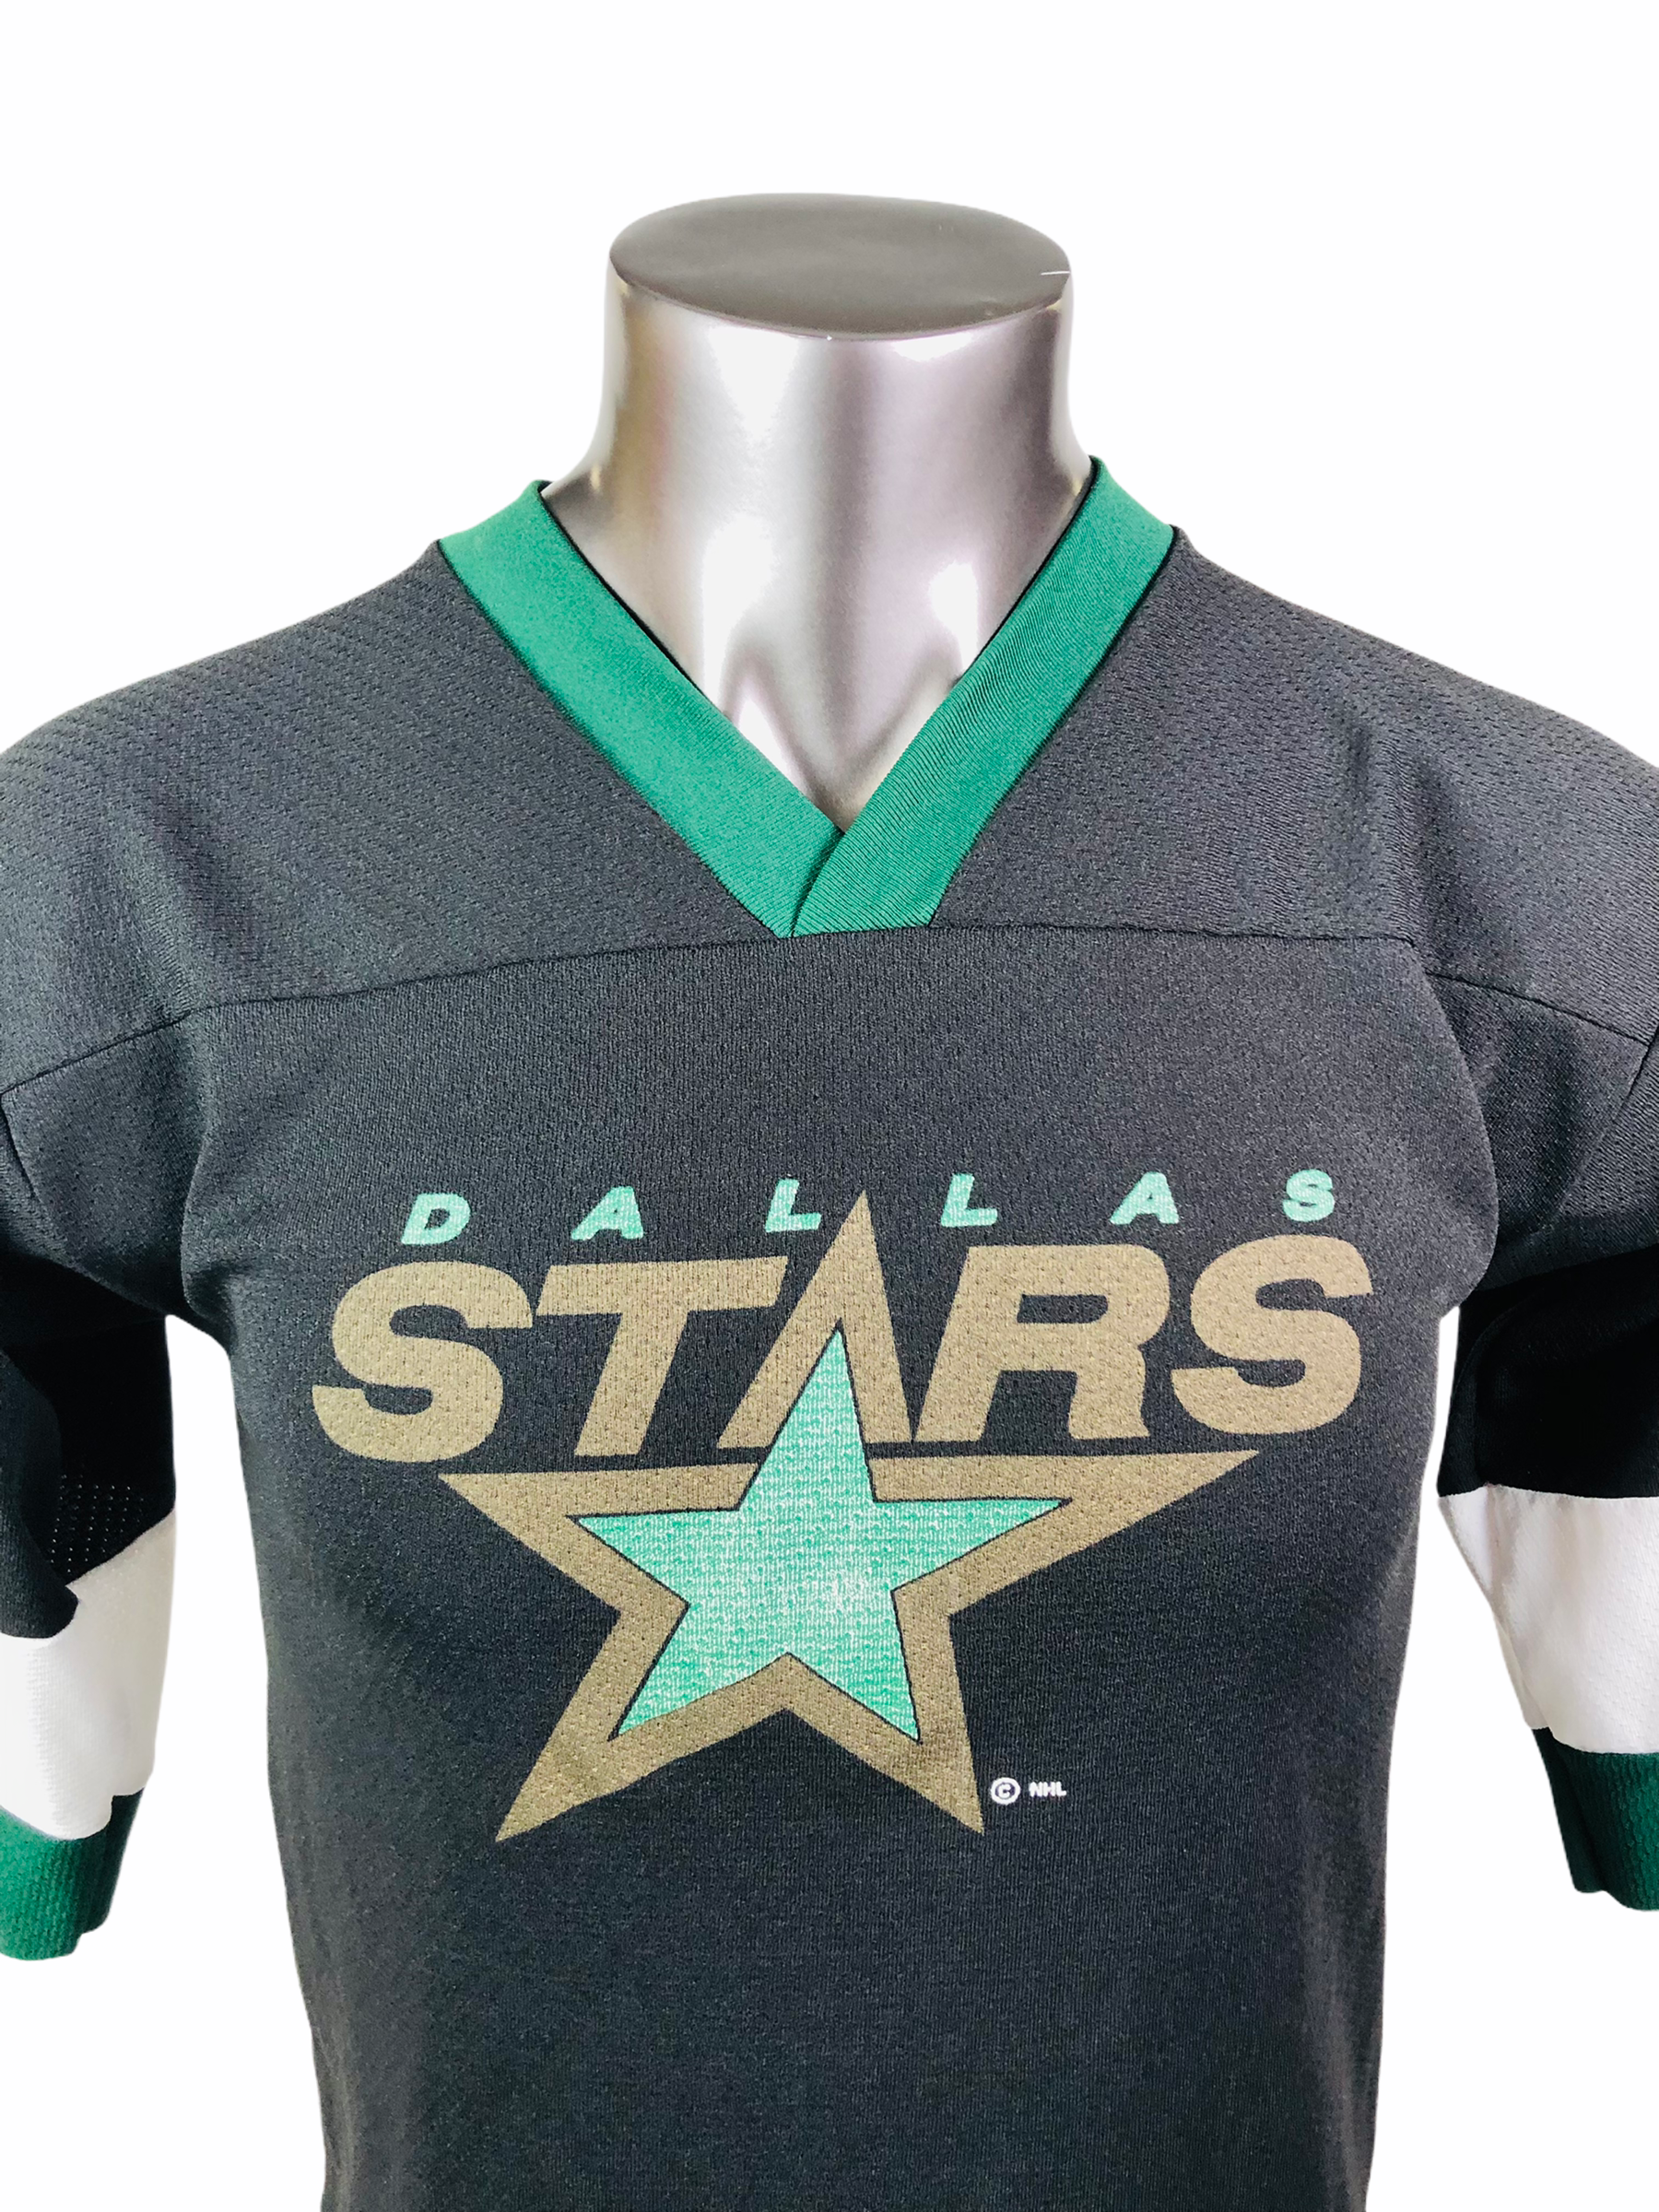 Stars collectible jersey